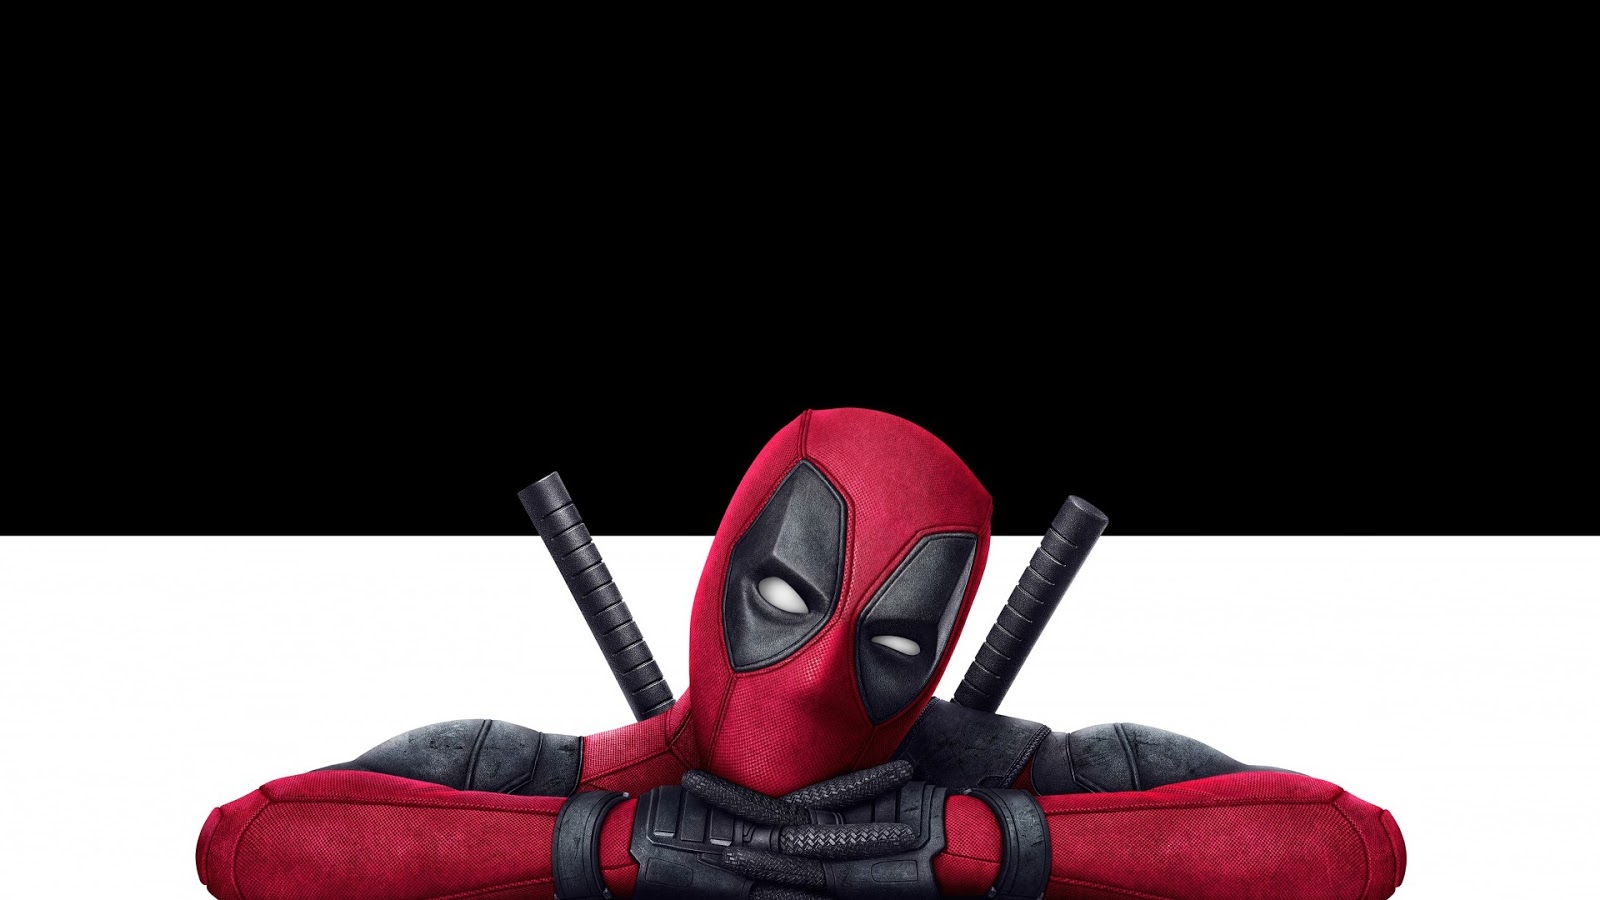 Download Free Hd Wallpapers Of Deadpool Movie 2016 Download Free Hd Wallpapers Collection